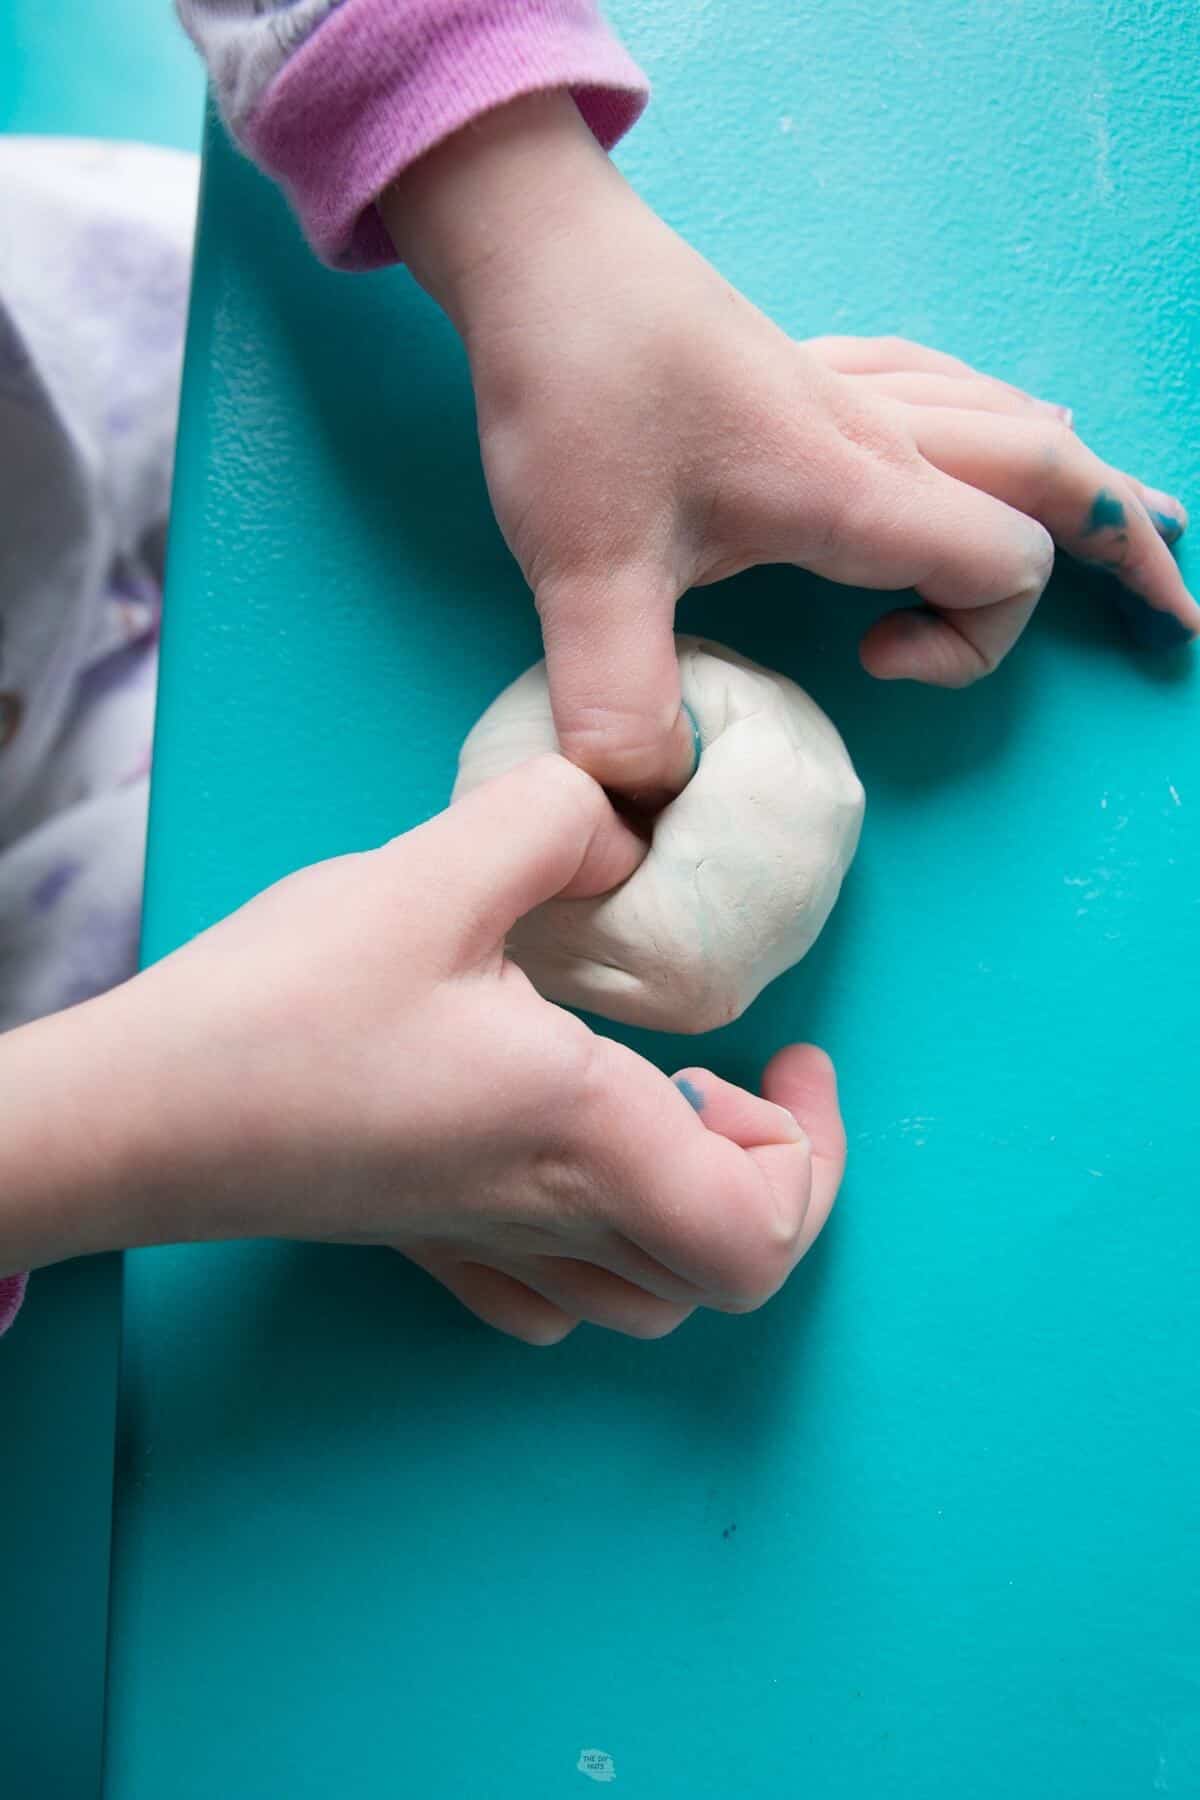 child's hand pushing thumbs into air dry clay ball.